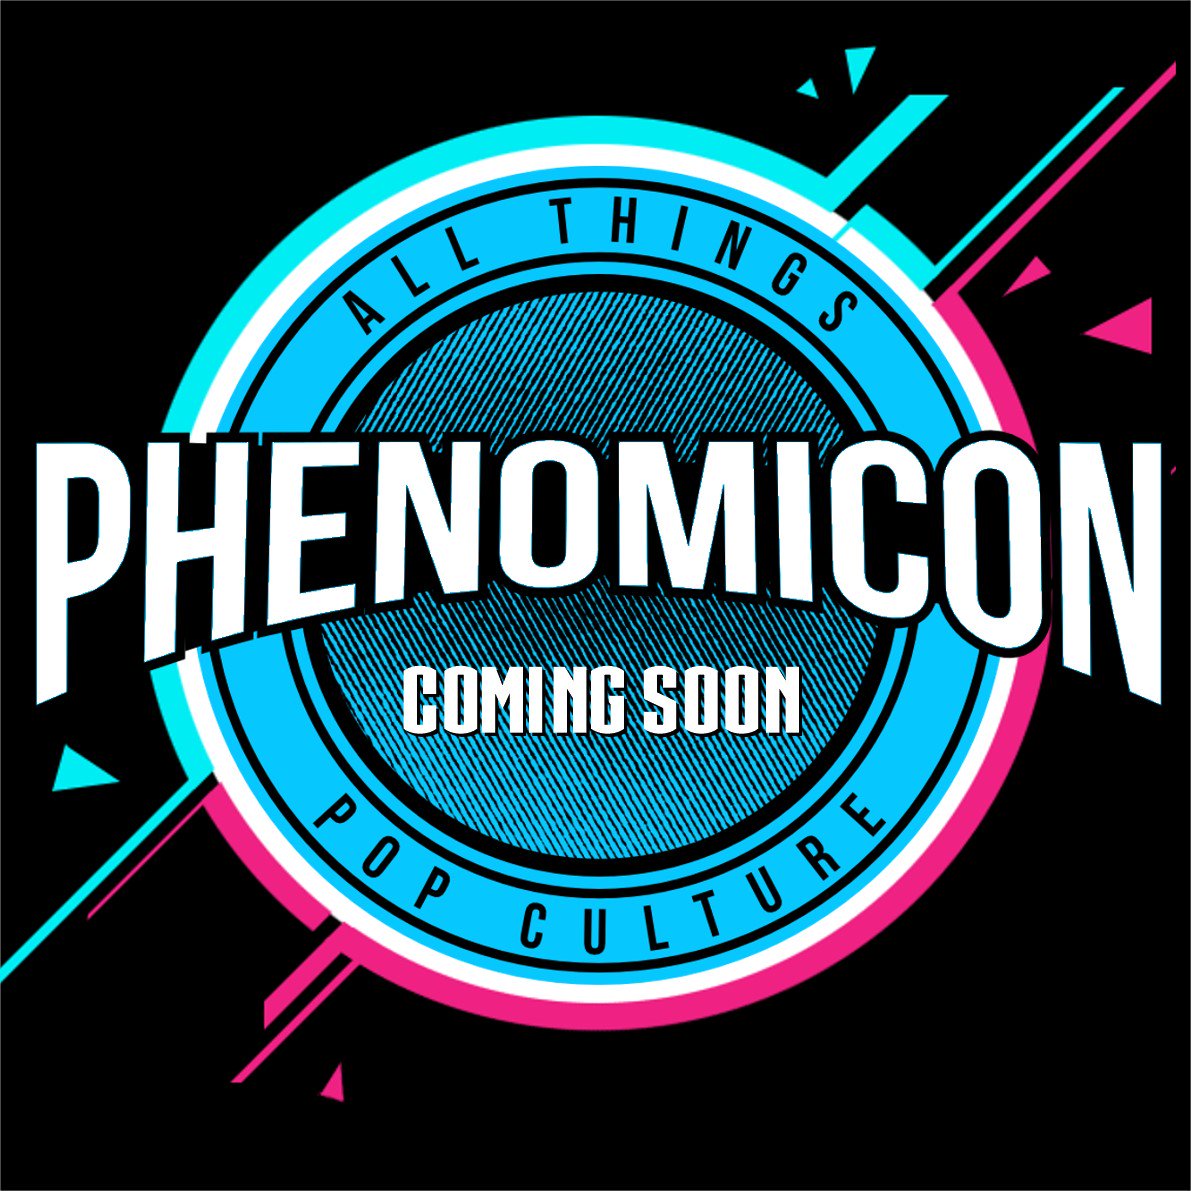 We're coming!
Dates and venue announcement coming soon!
#popculture #popculturecon #convention #conlife #celebrities #celebrityguests #cosplay #podcasting #gaming #comics #artists #television #film #fun